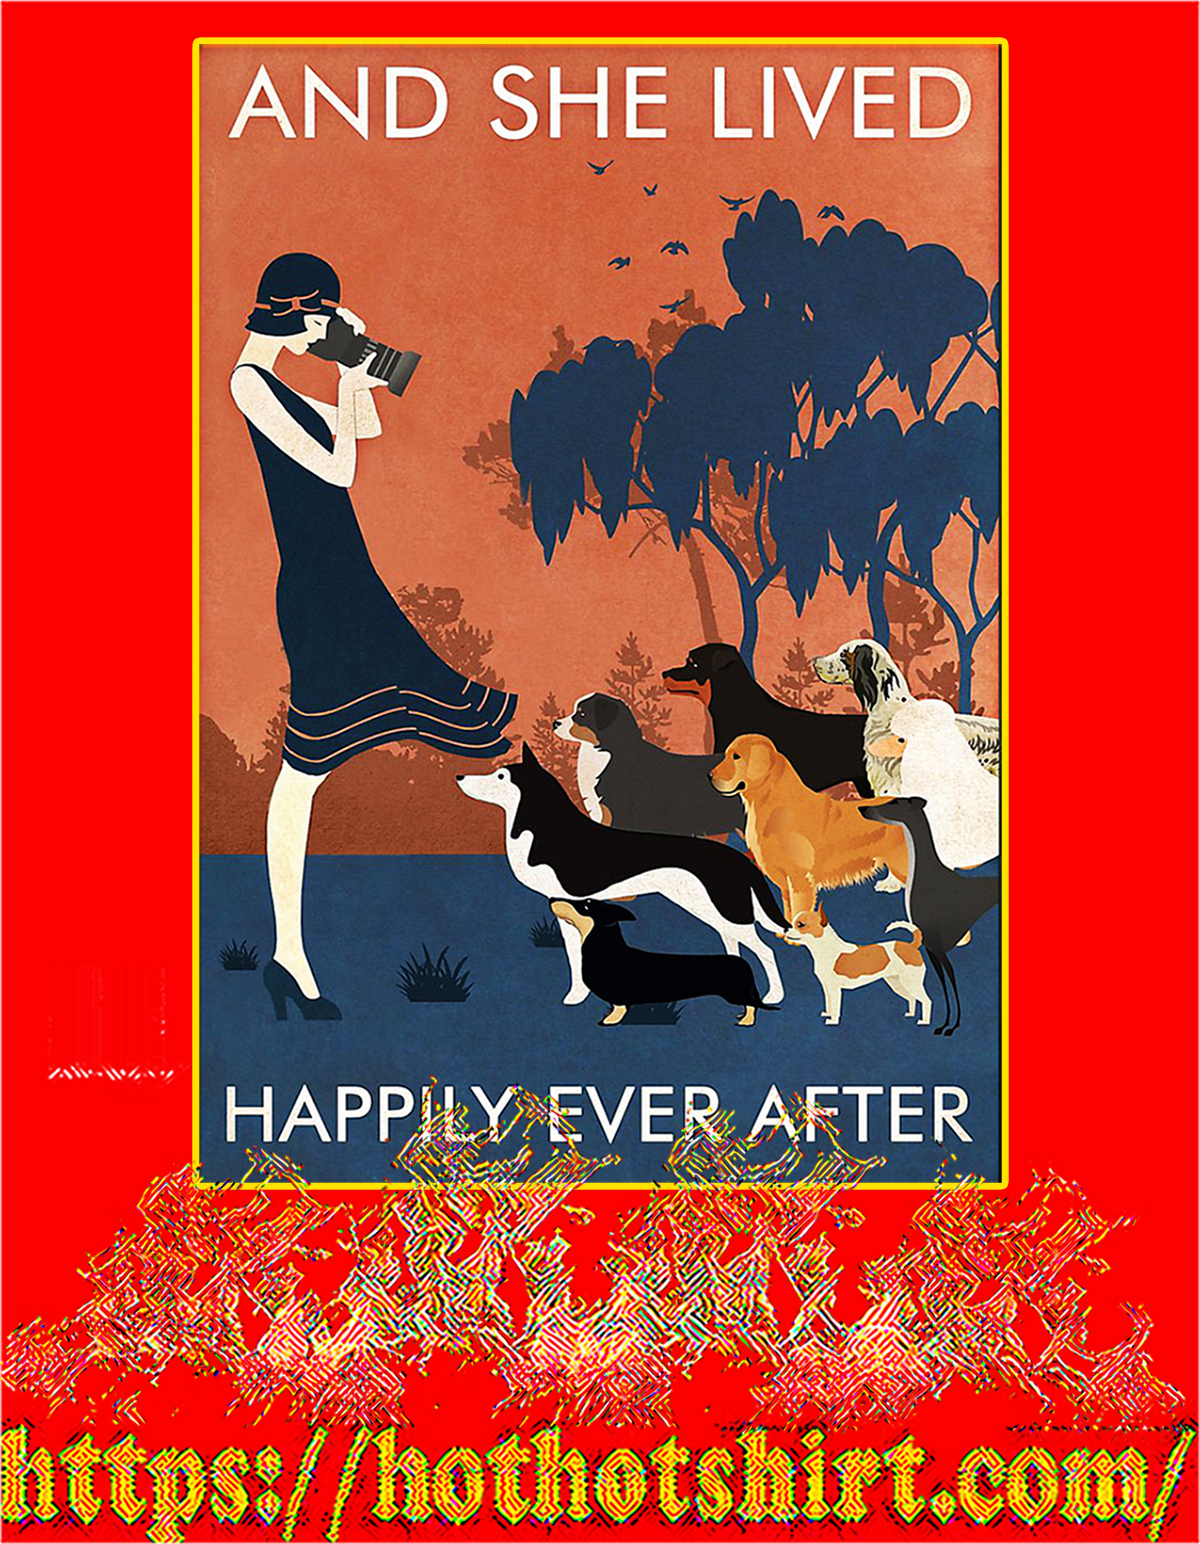 Photography dog And she lived happily ever after poster